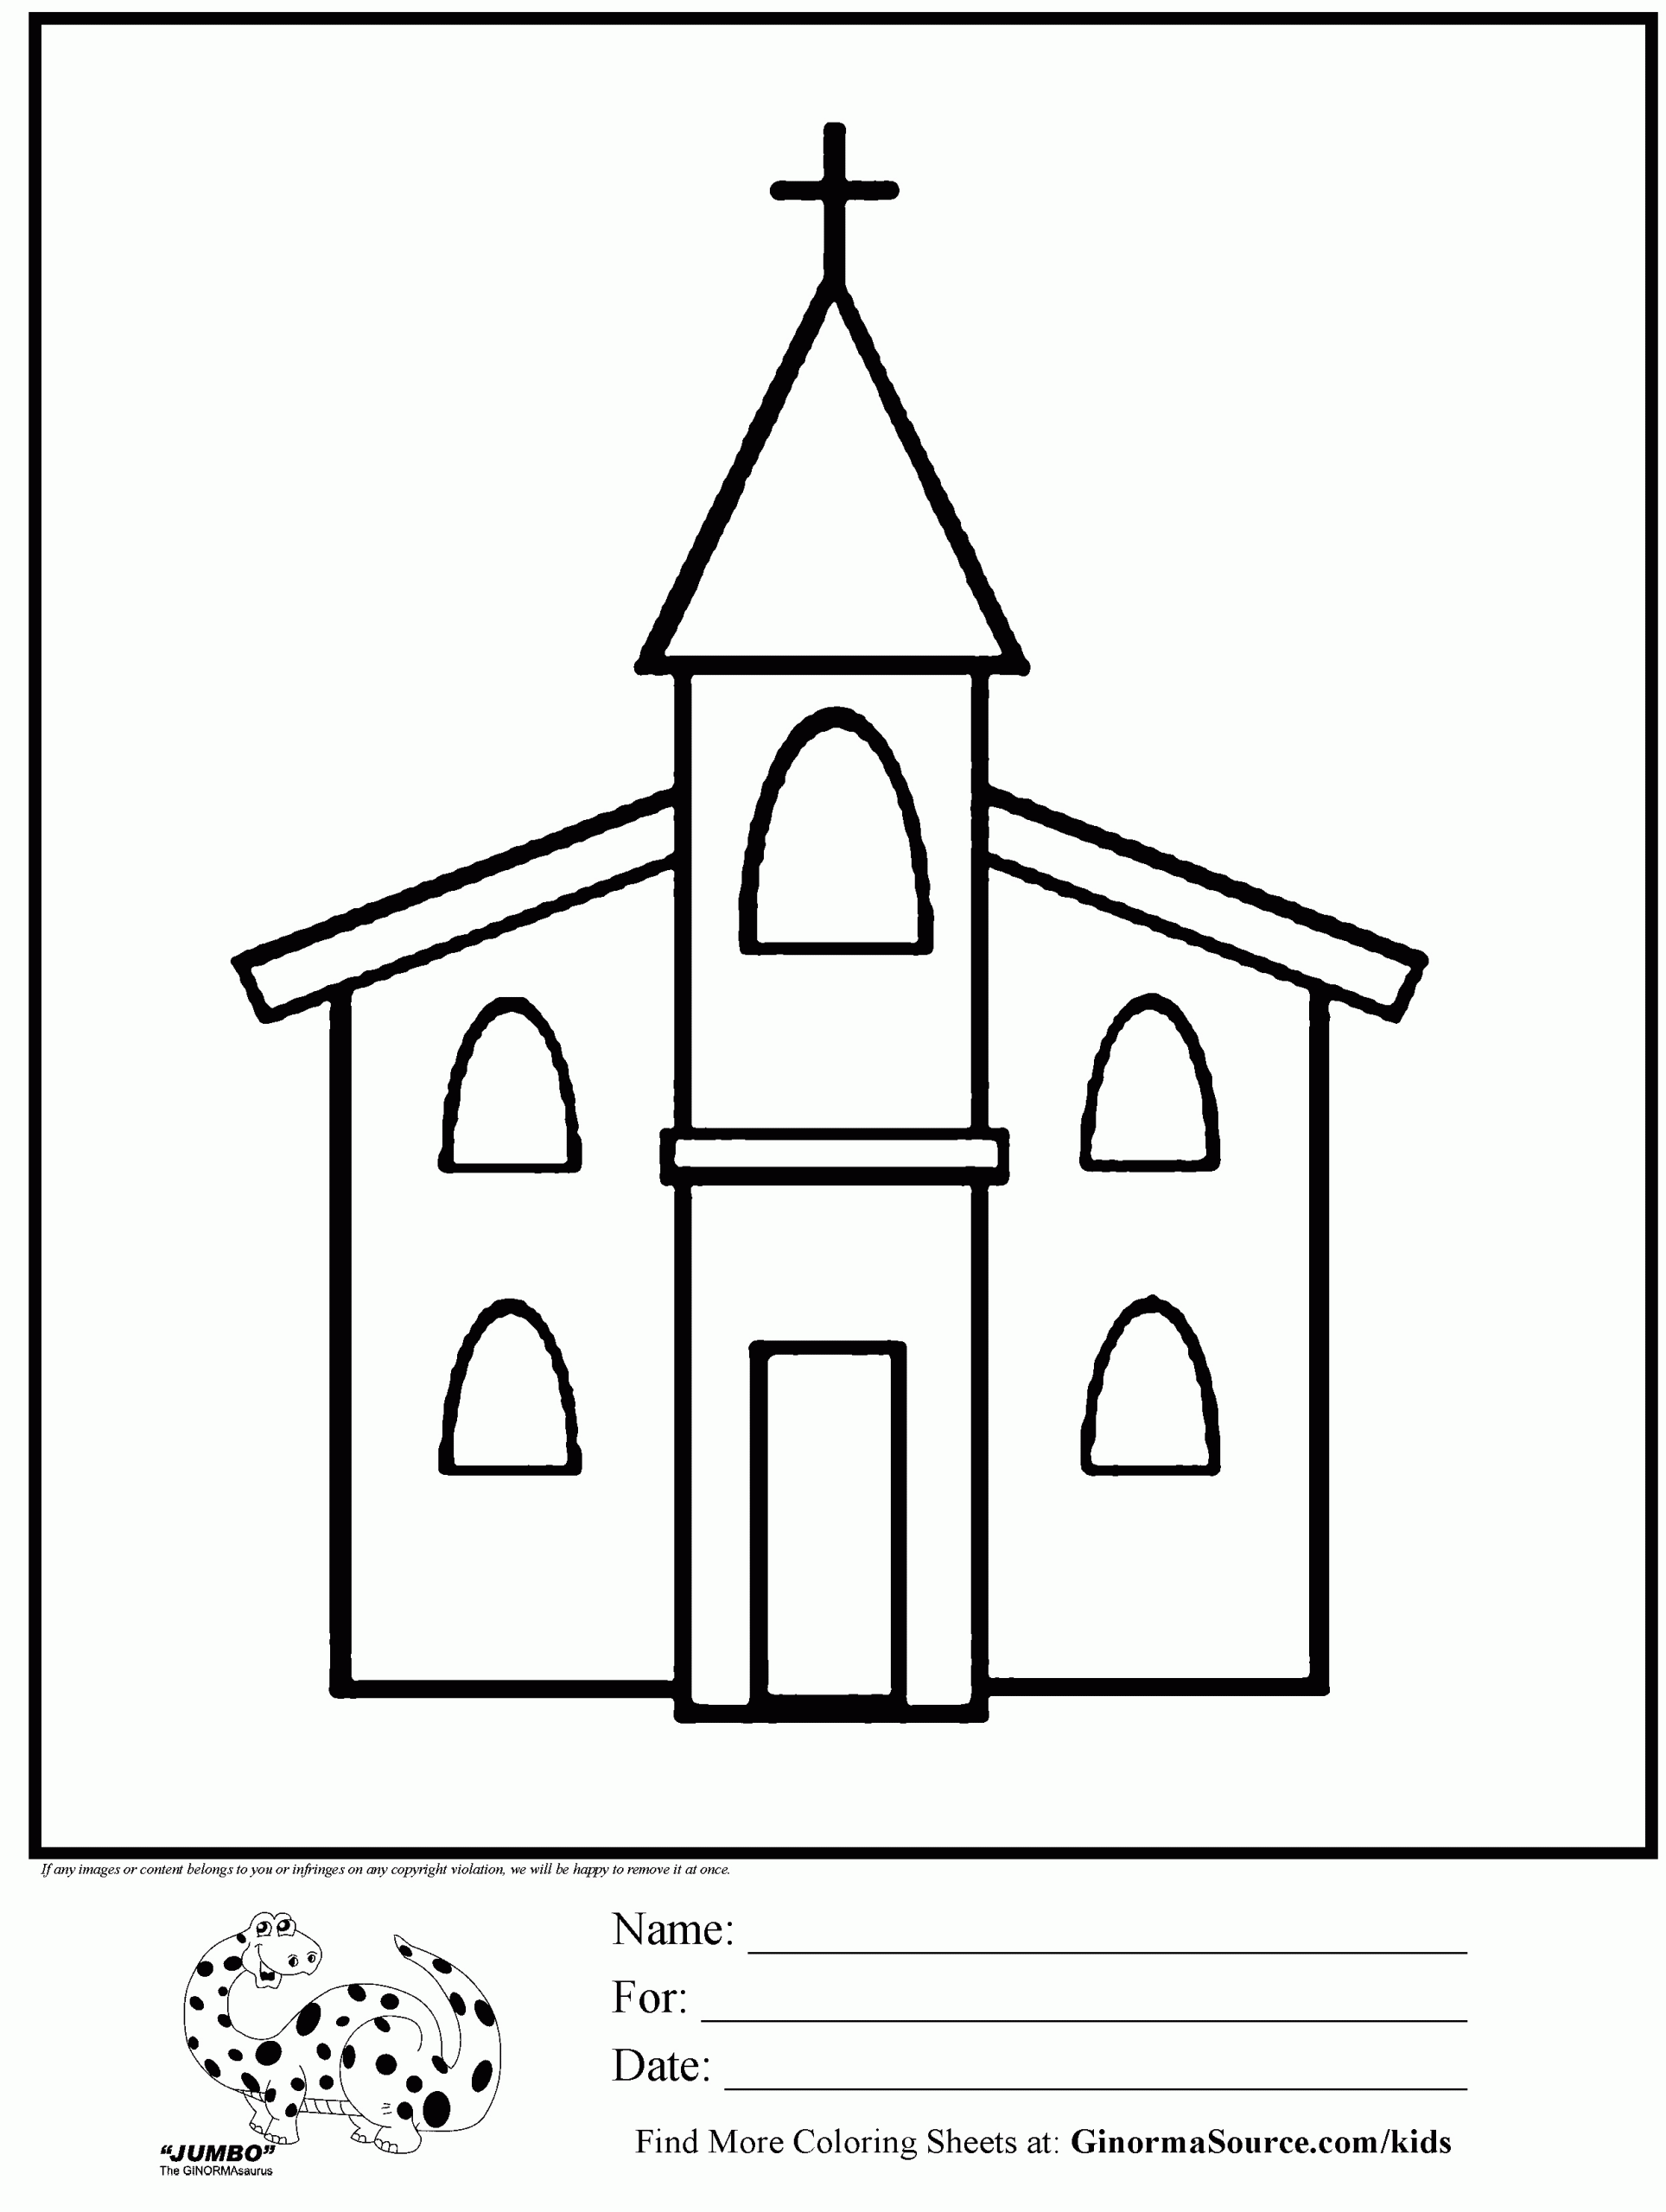 Kids Coloring Pages For Church
 Coloring Page Church JESUS 4 children